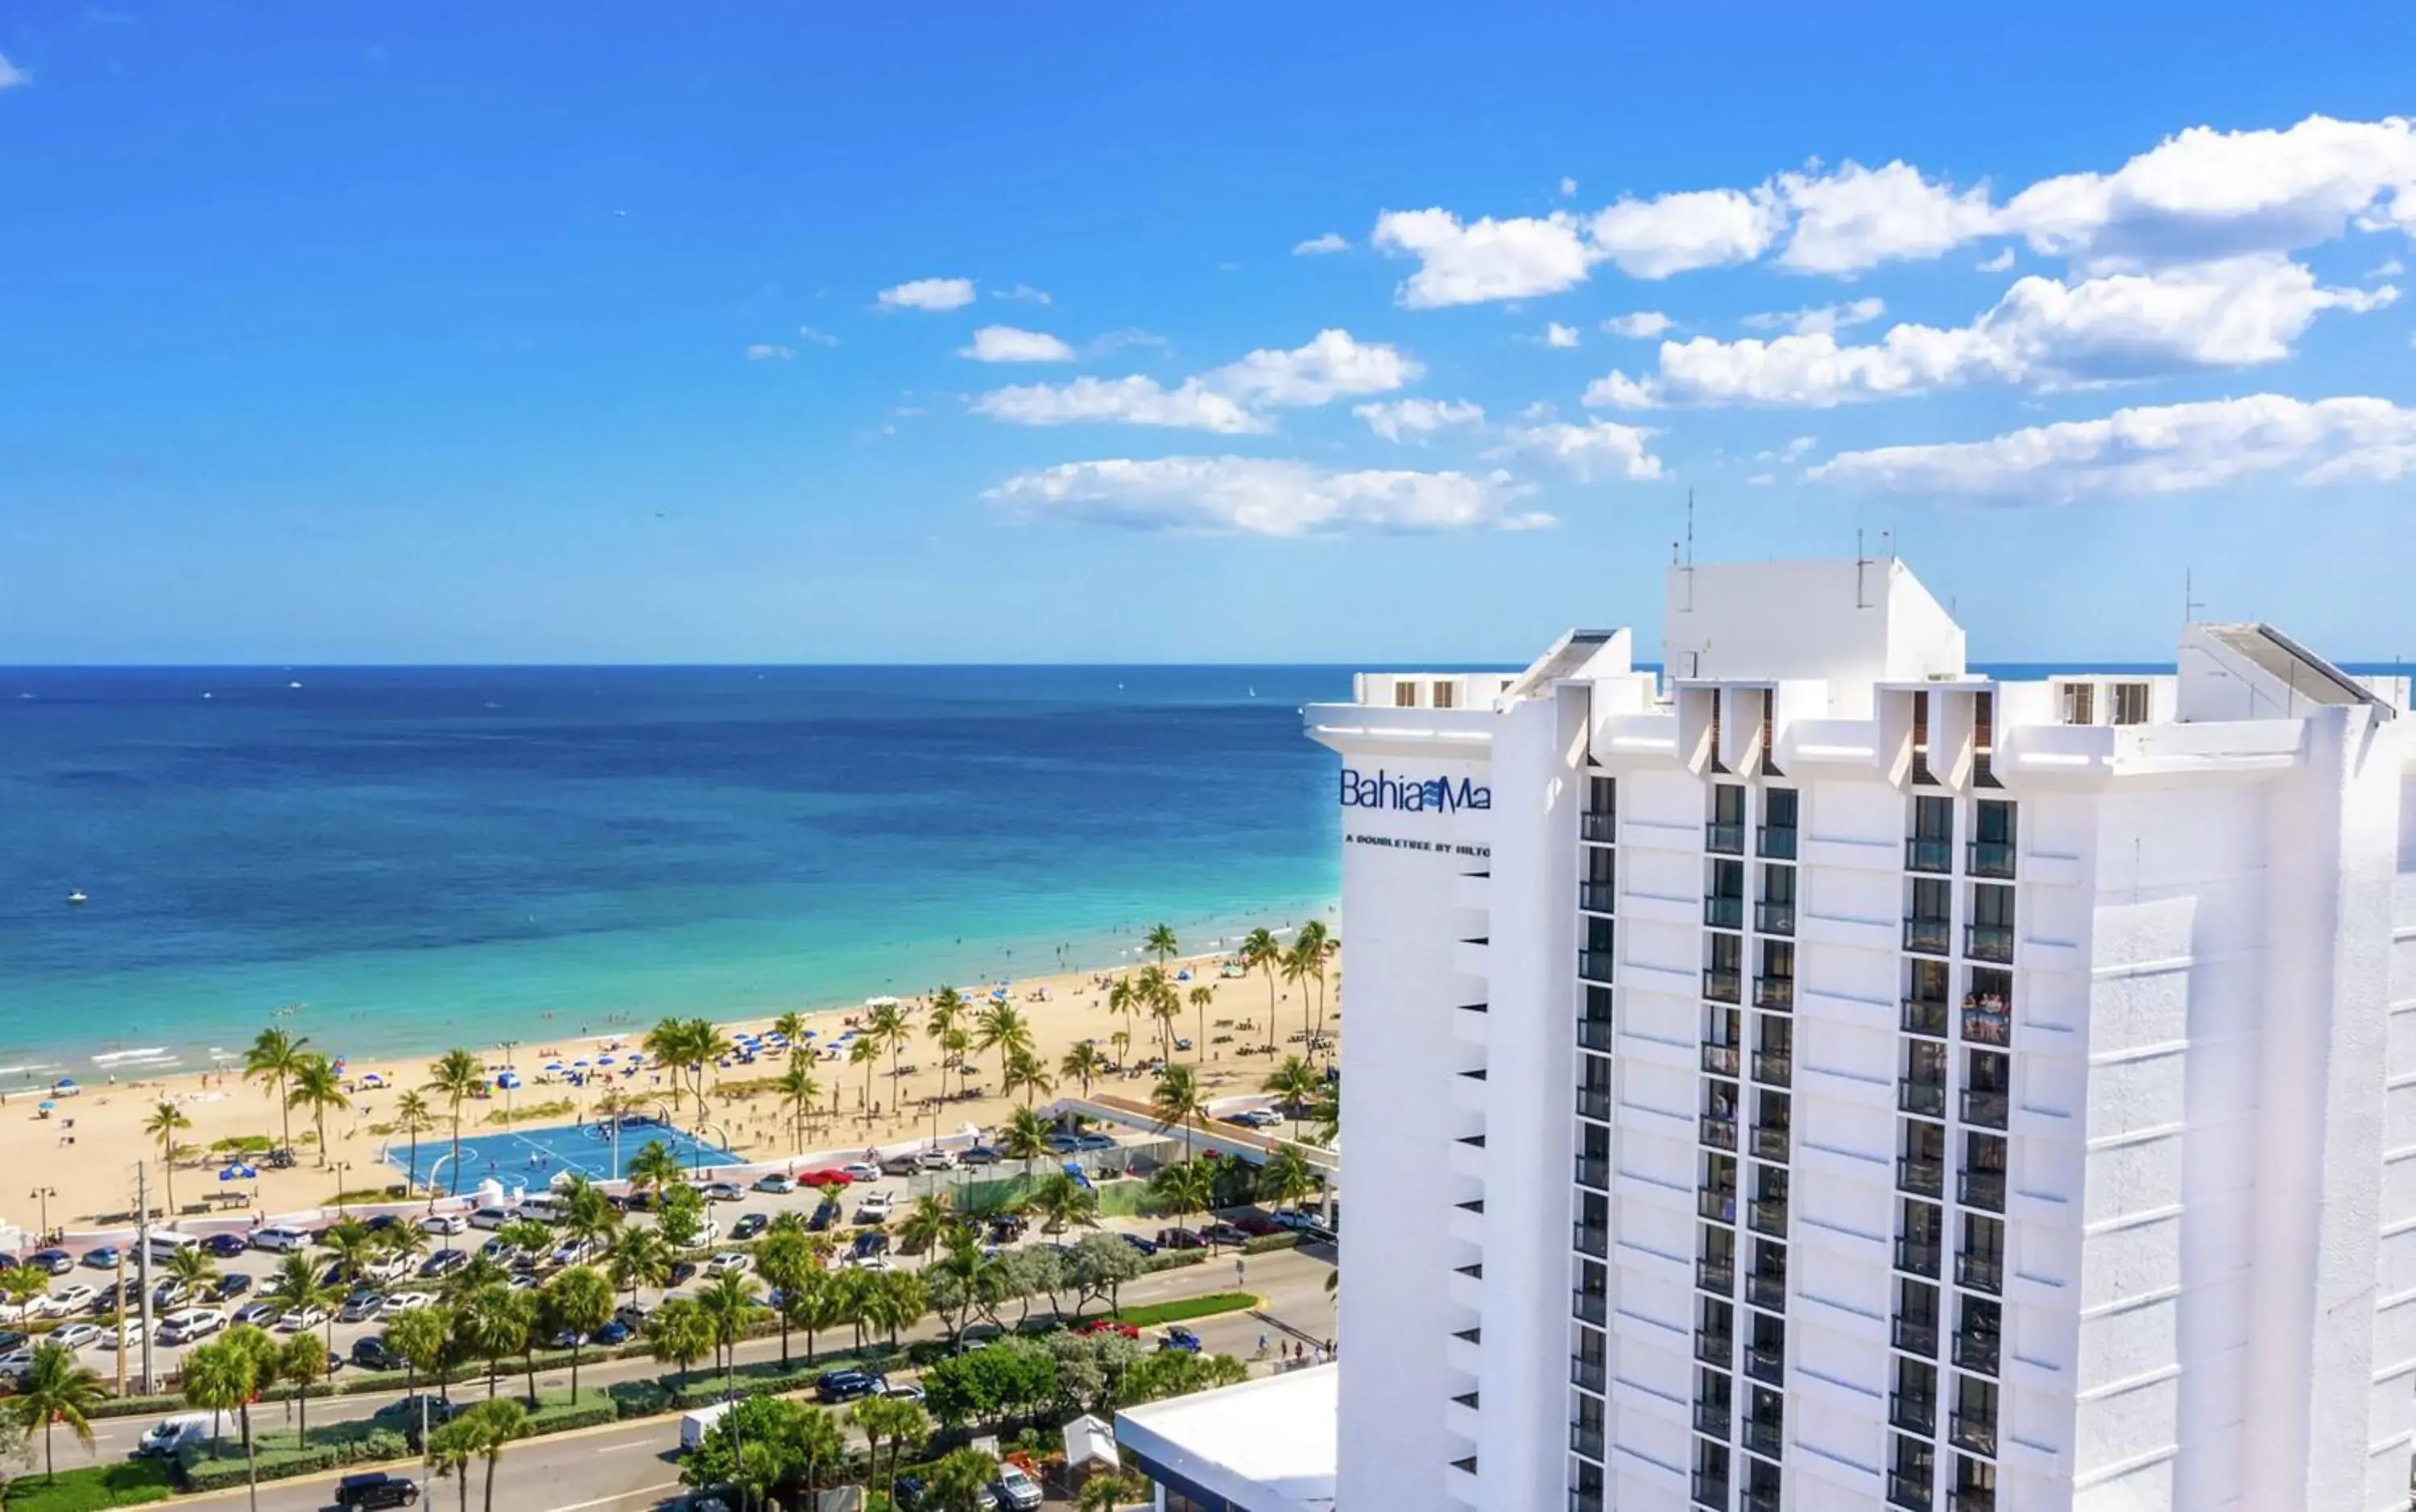 Property building in Bahia Mar Fort Lauderdale Beach - DoubleTree by Hilton